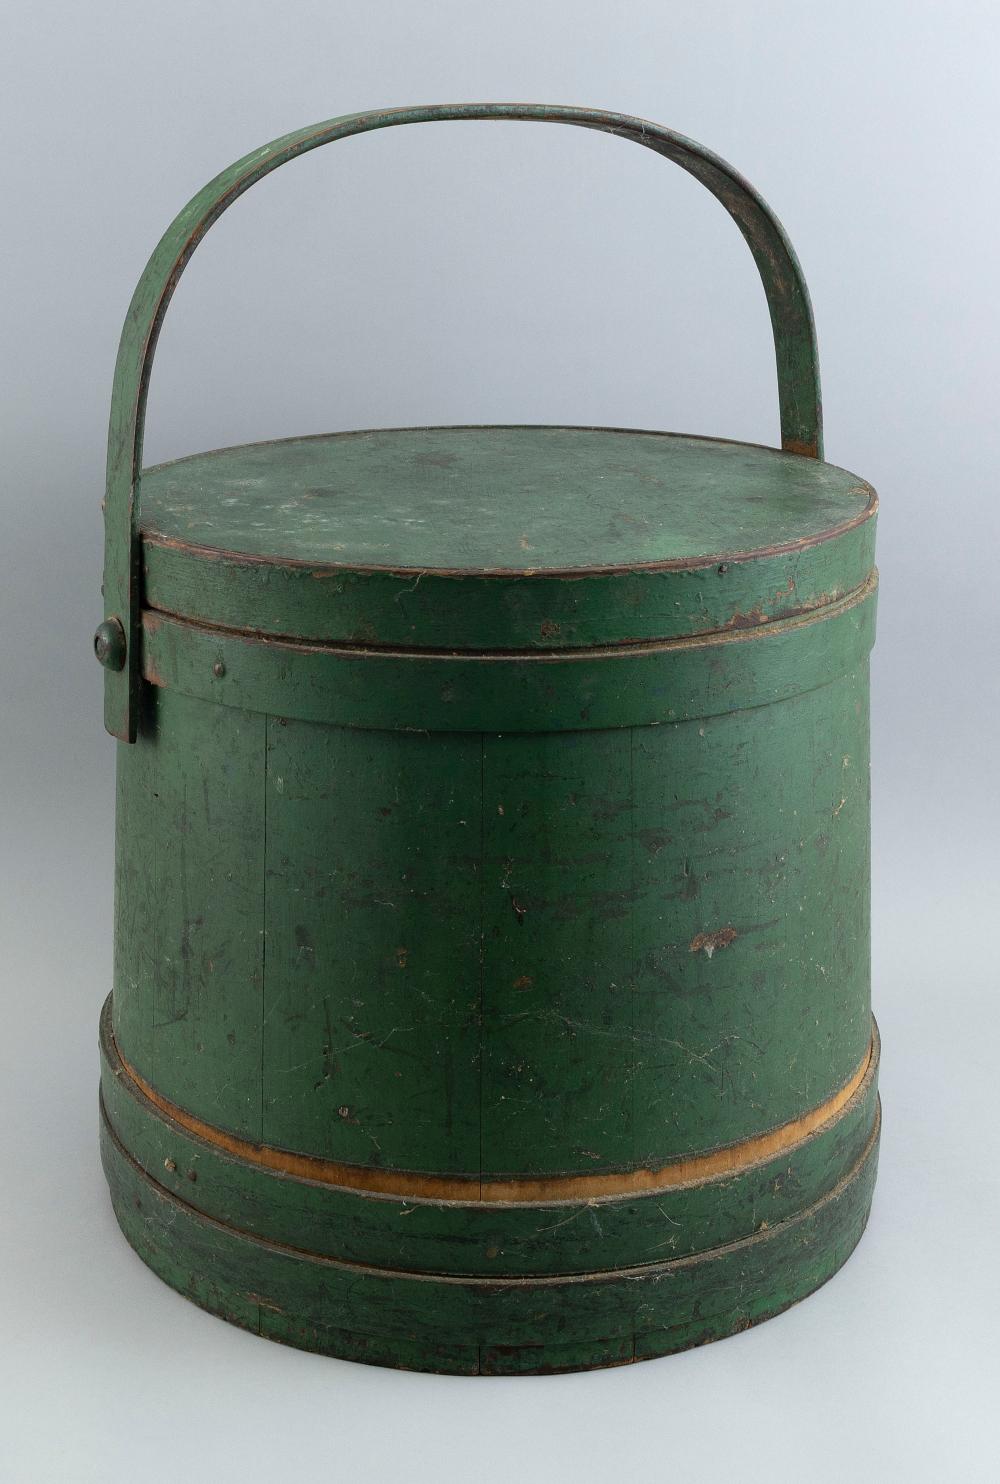 LARGE COVERED FIRKIN, POSSIBLY